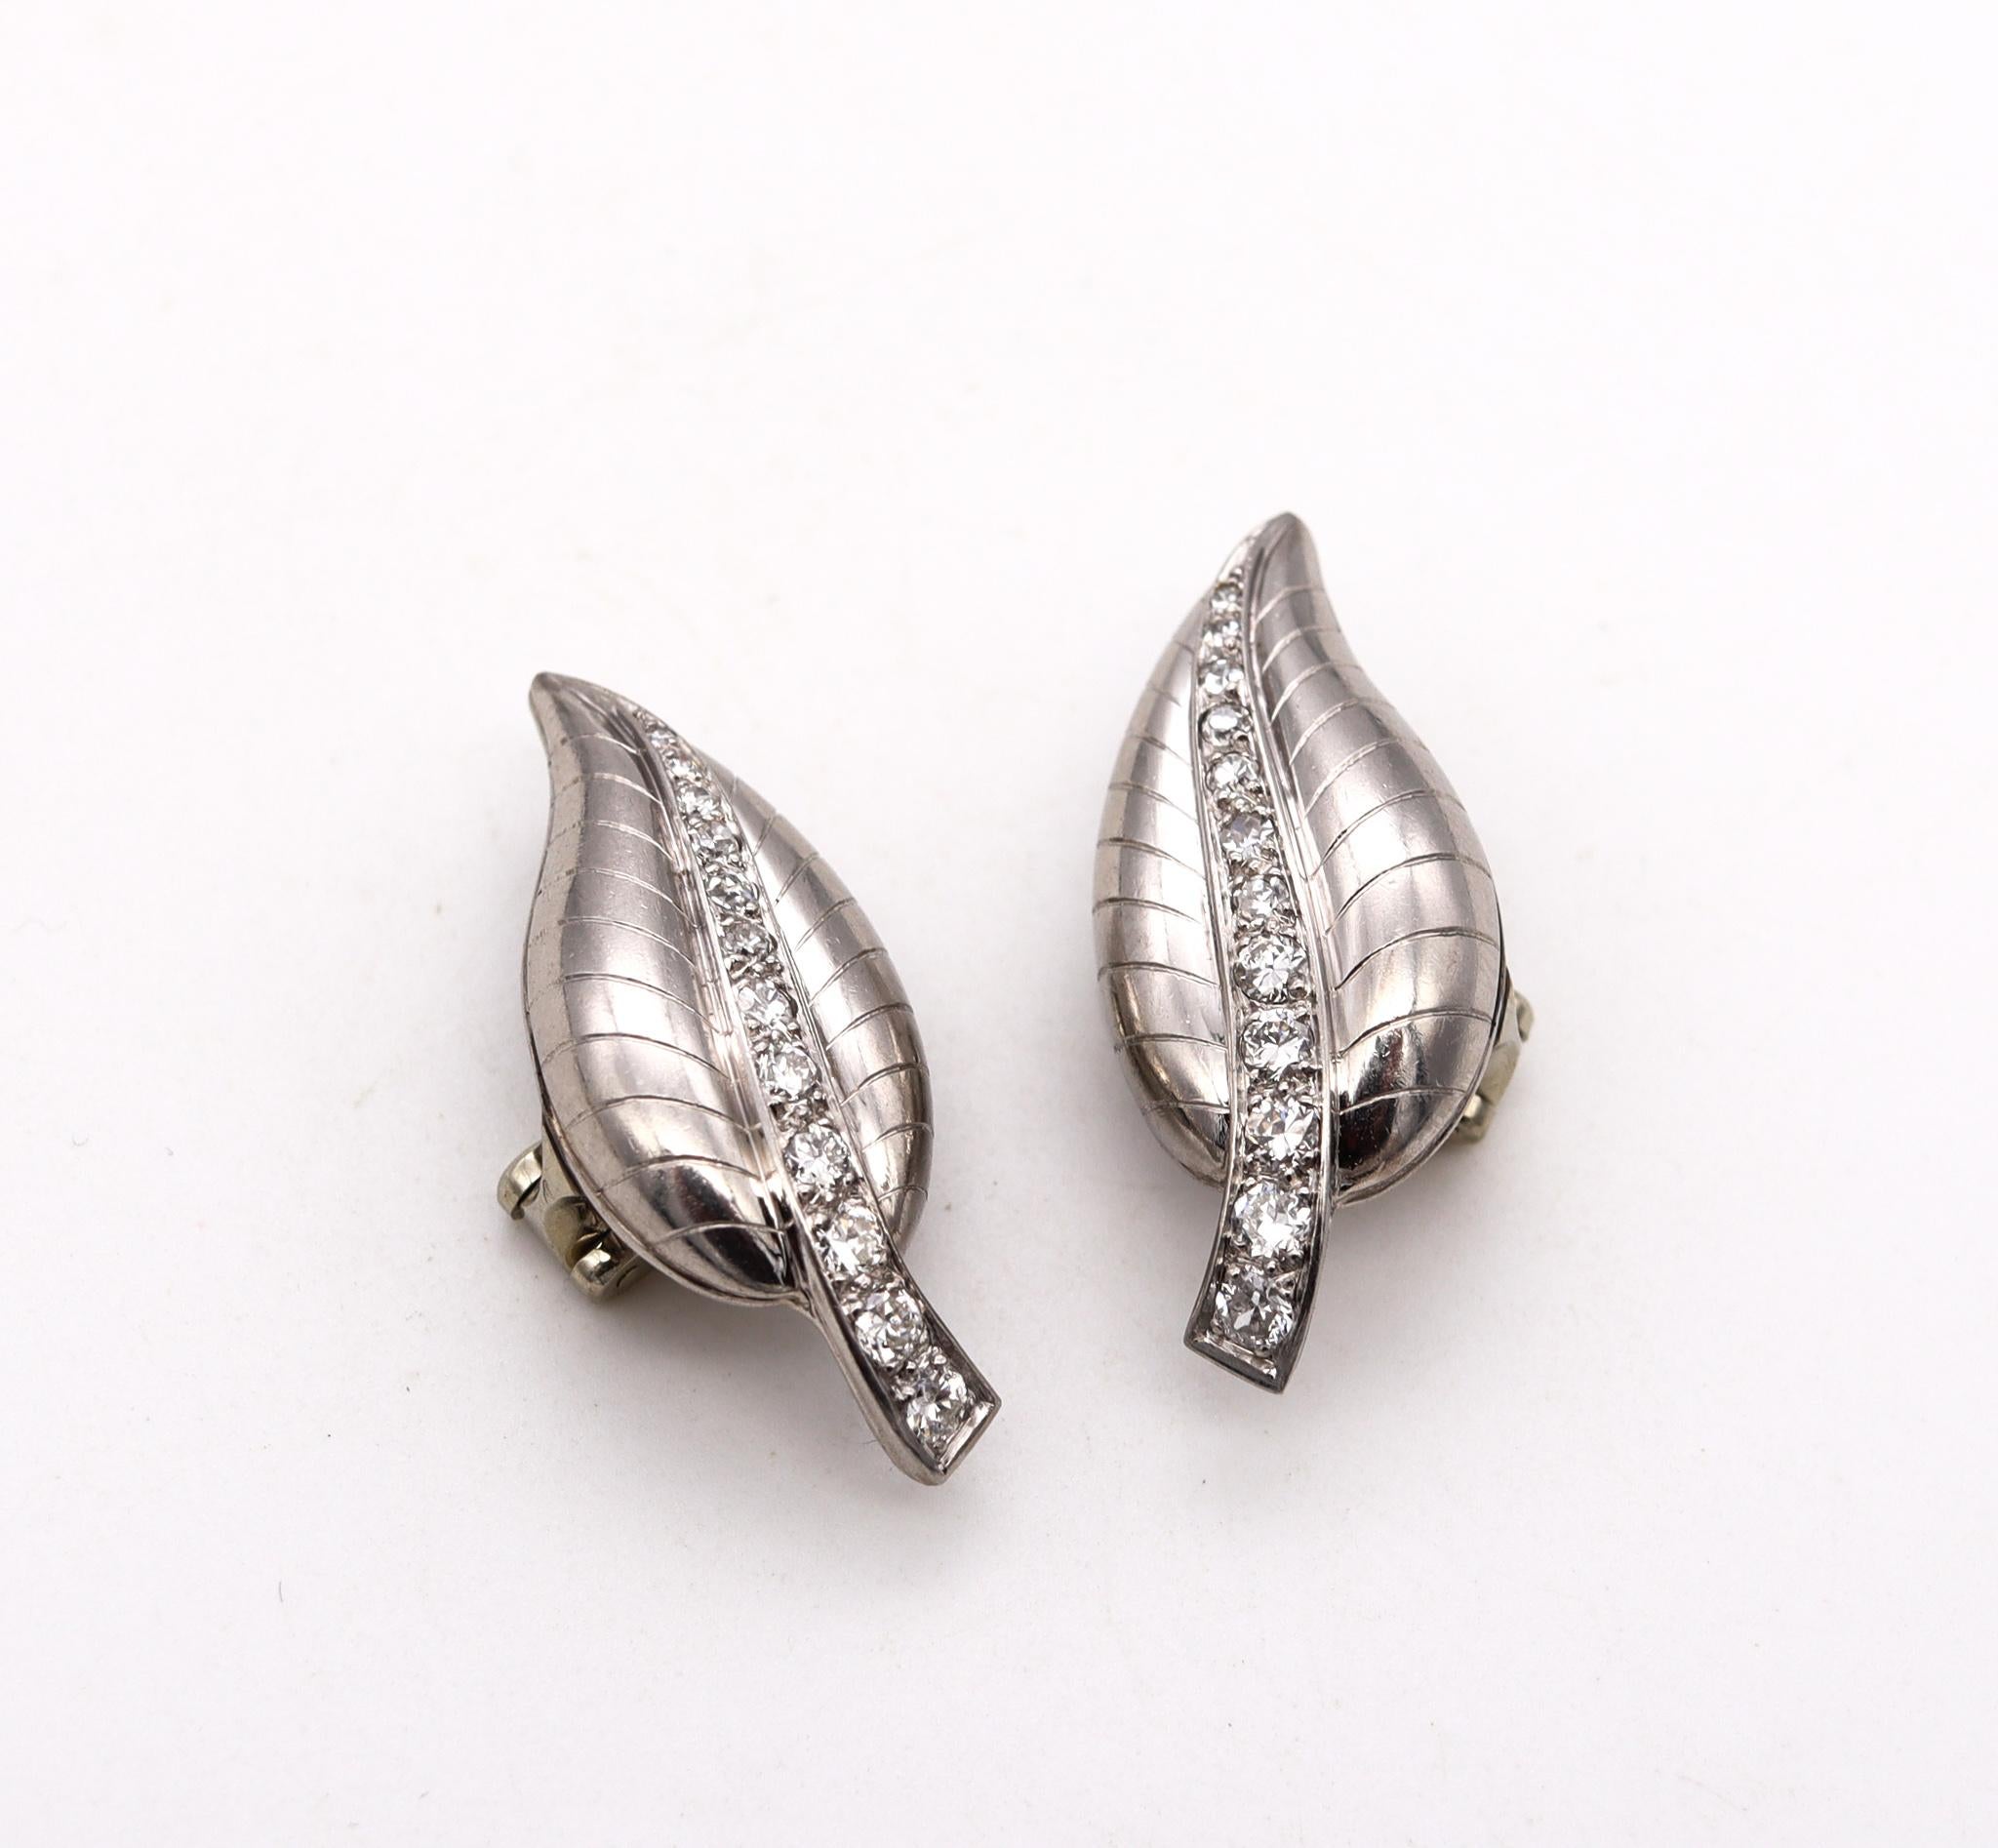 French late deco diamonds clips-earrings designed by Suzanne Belperron (Attr.).

Beautiful and elegant pieces, created in Paris France during the postwar period, back in the 1950's. These gorgeous pair of clips earrings has been carefully crafted